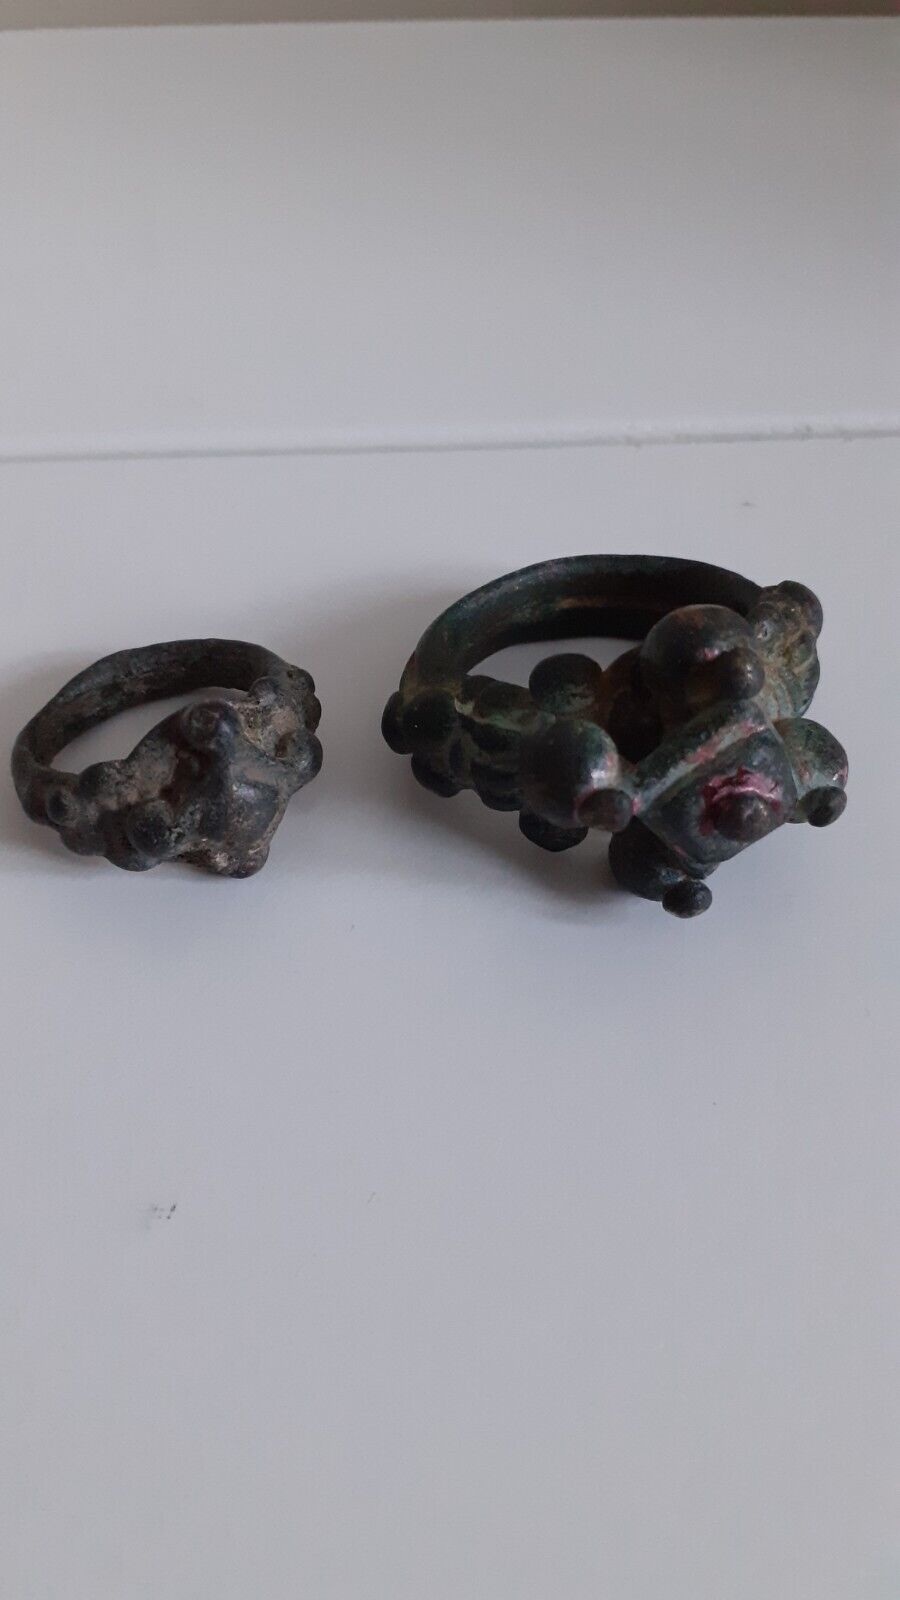 Two Antique Bronze Tribal India Lingham Rings  C19th Century or earlier, Hindu